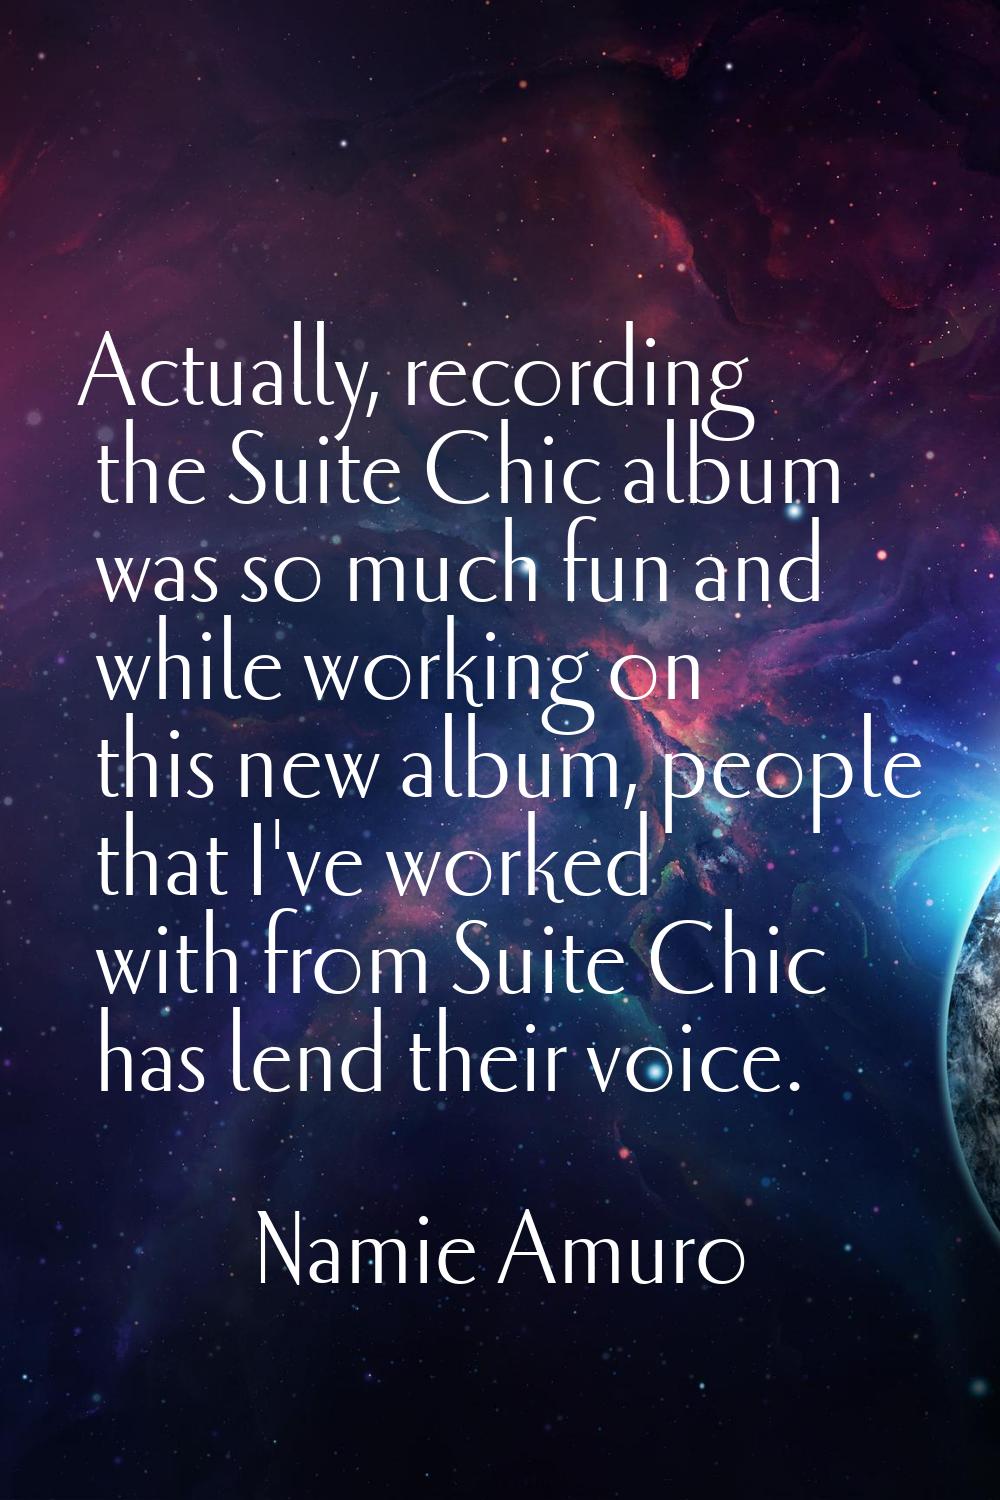 Actually, recording the Suite Chic album was so much fun and while working on this new album, peopl